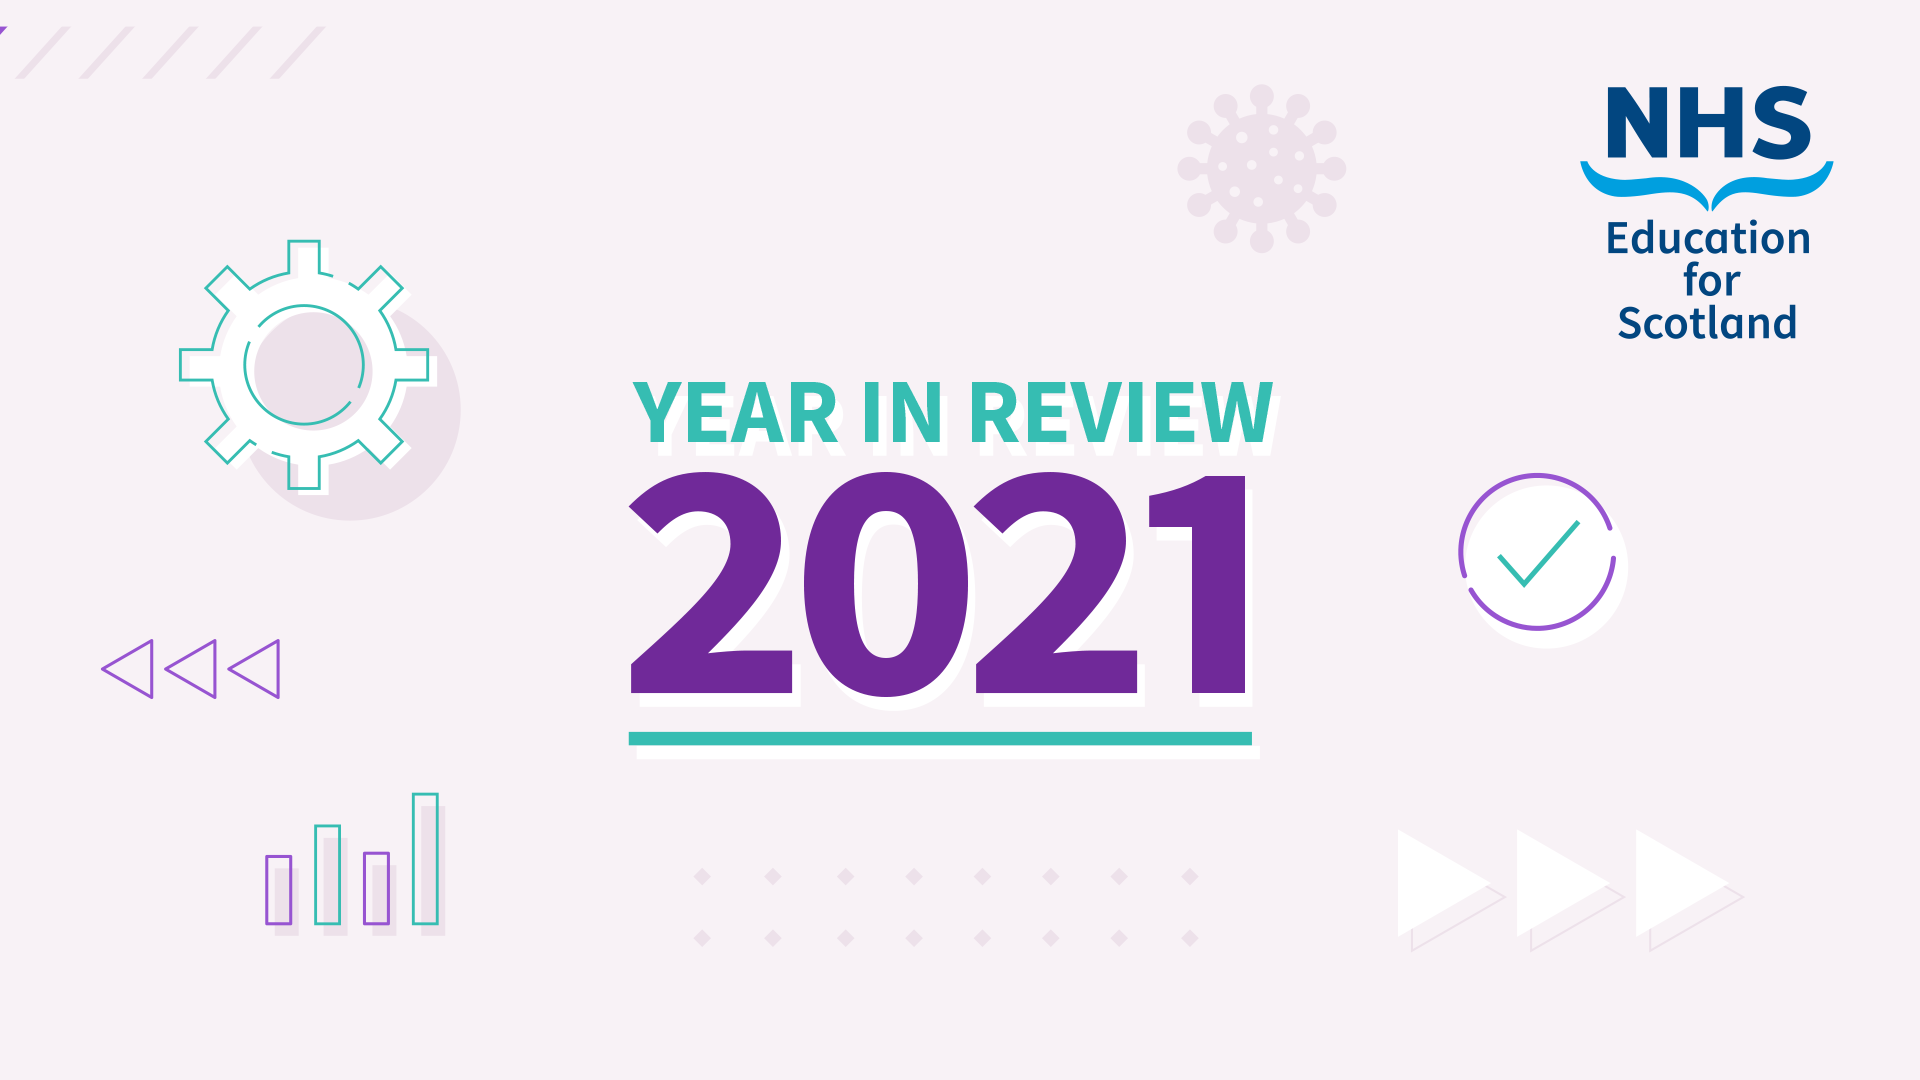 2021 - Our year in review